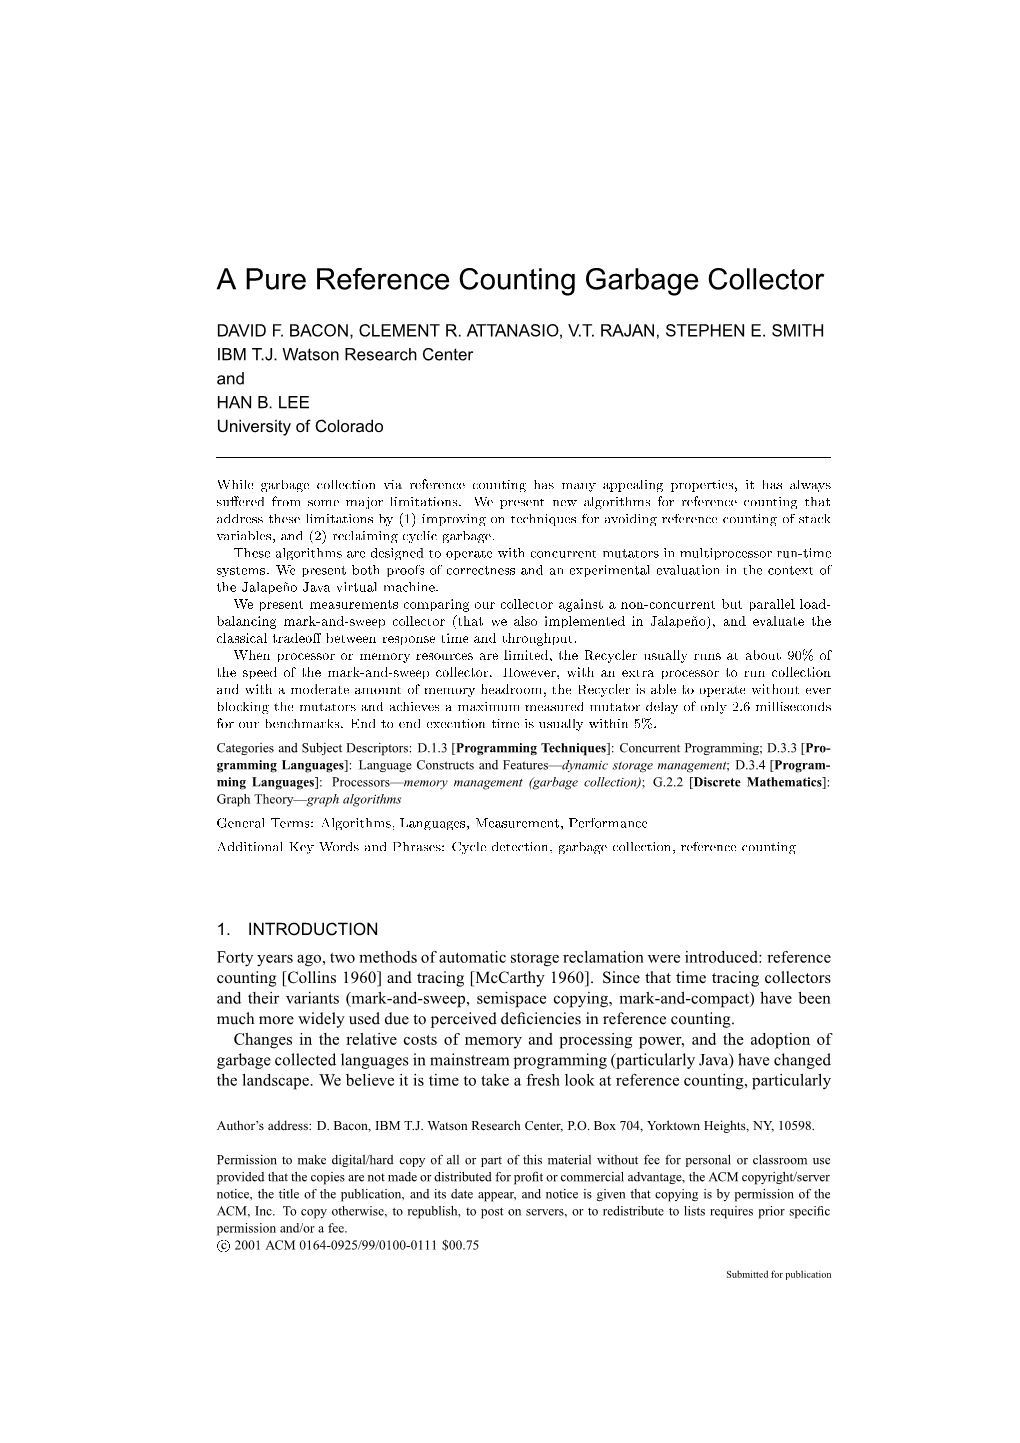 A Pure Reference Counting Garbage Collector